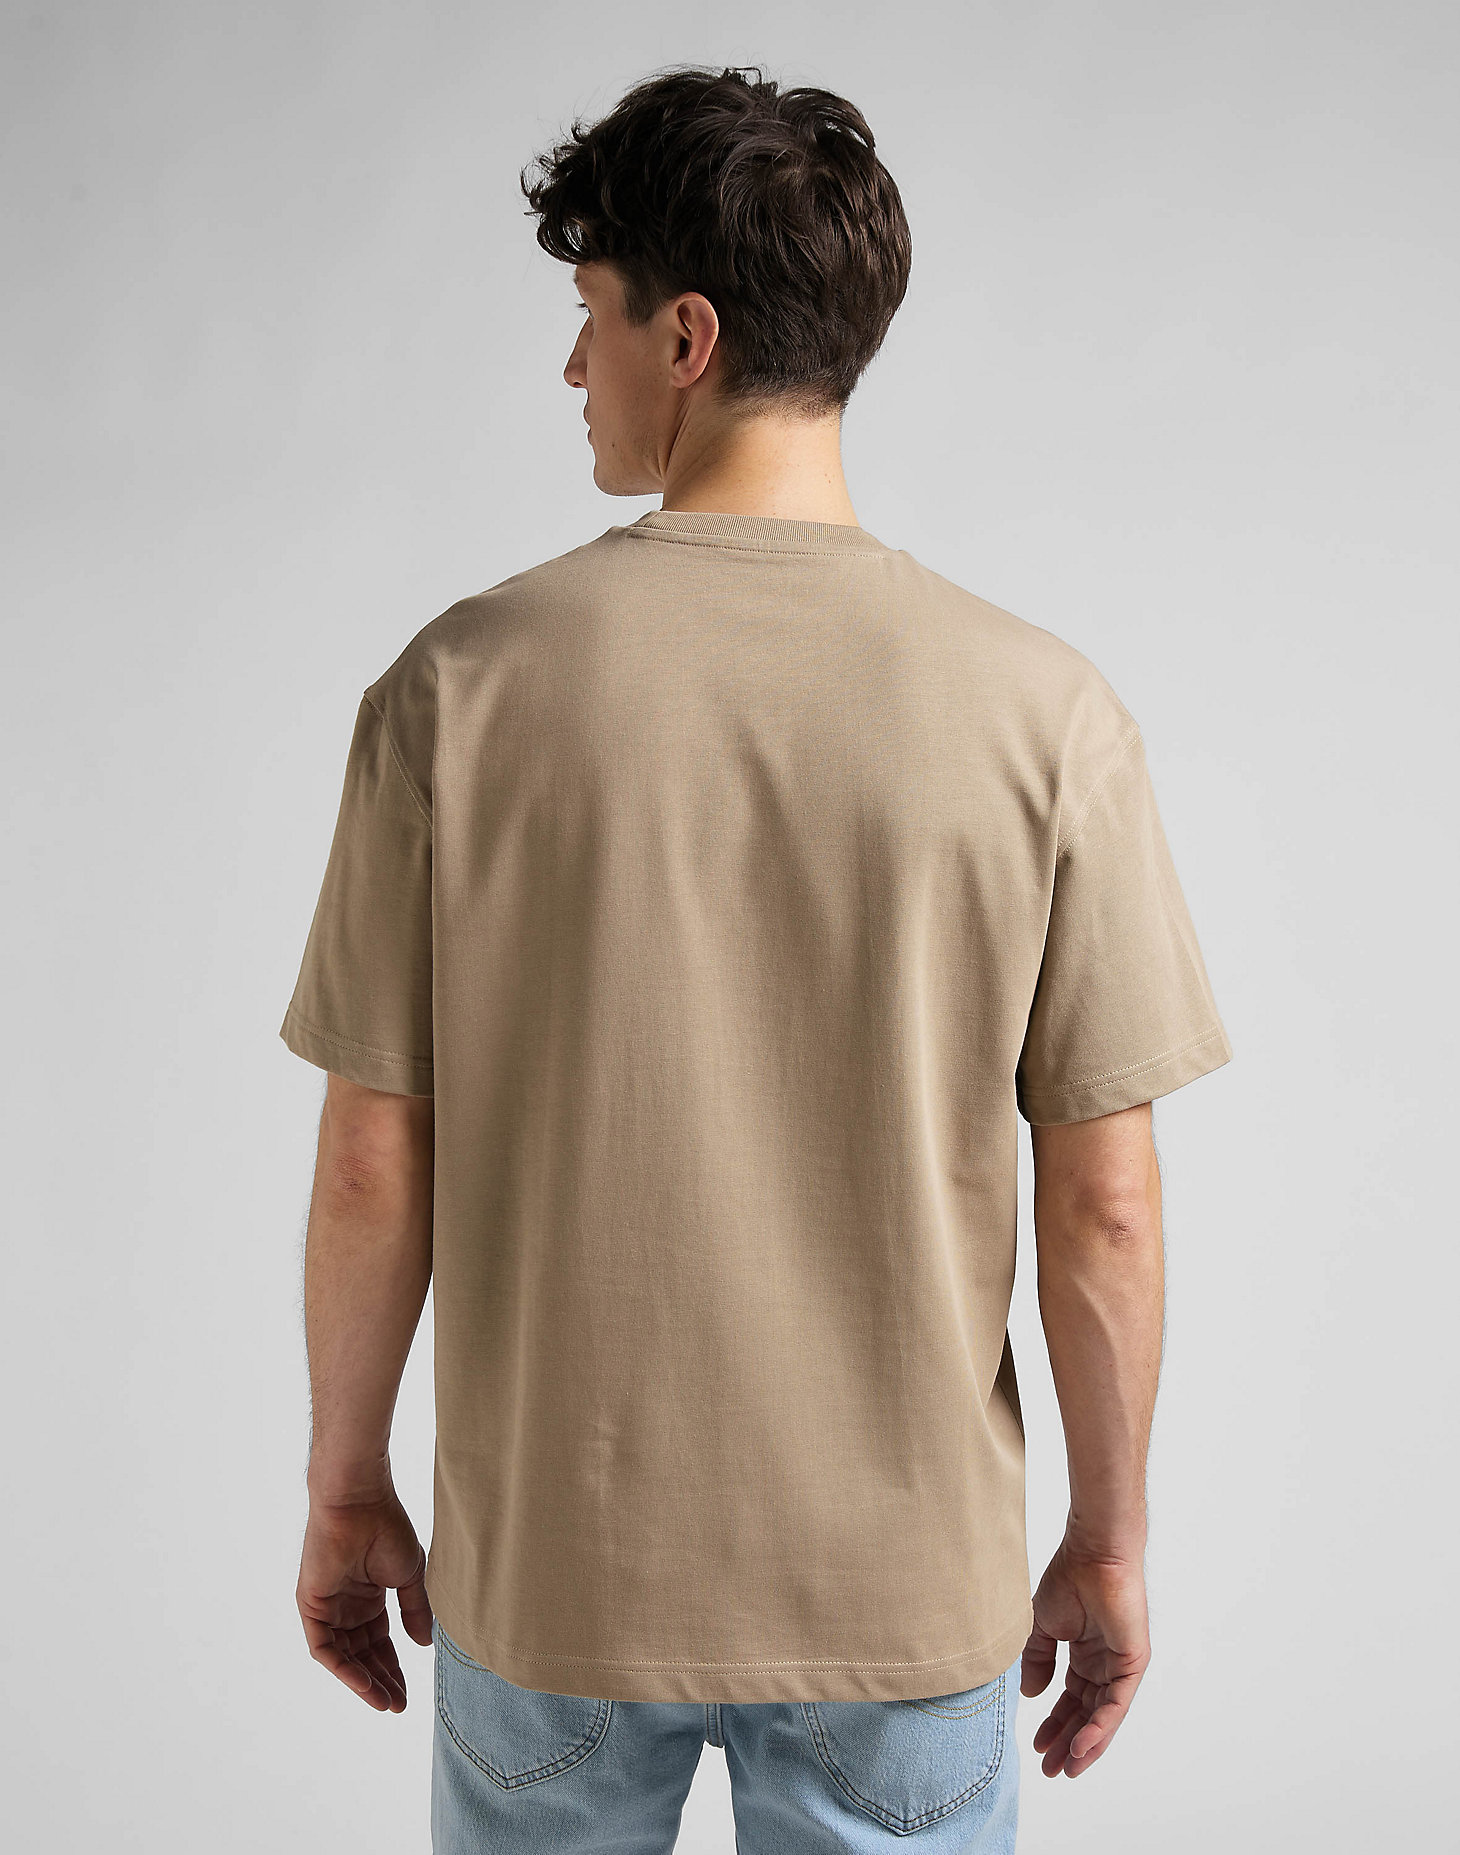 Core Loose Tee in Clay alternative view 1